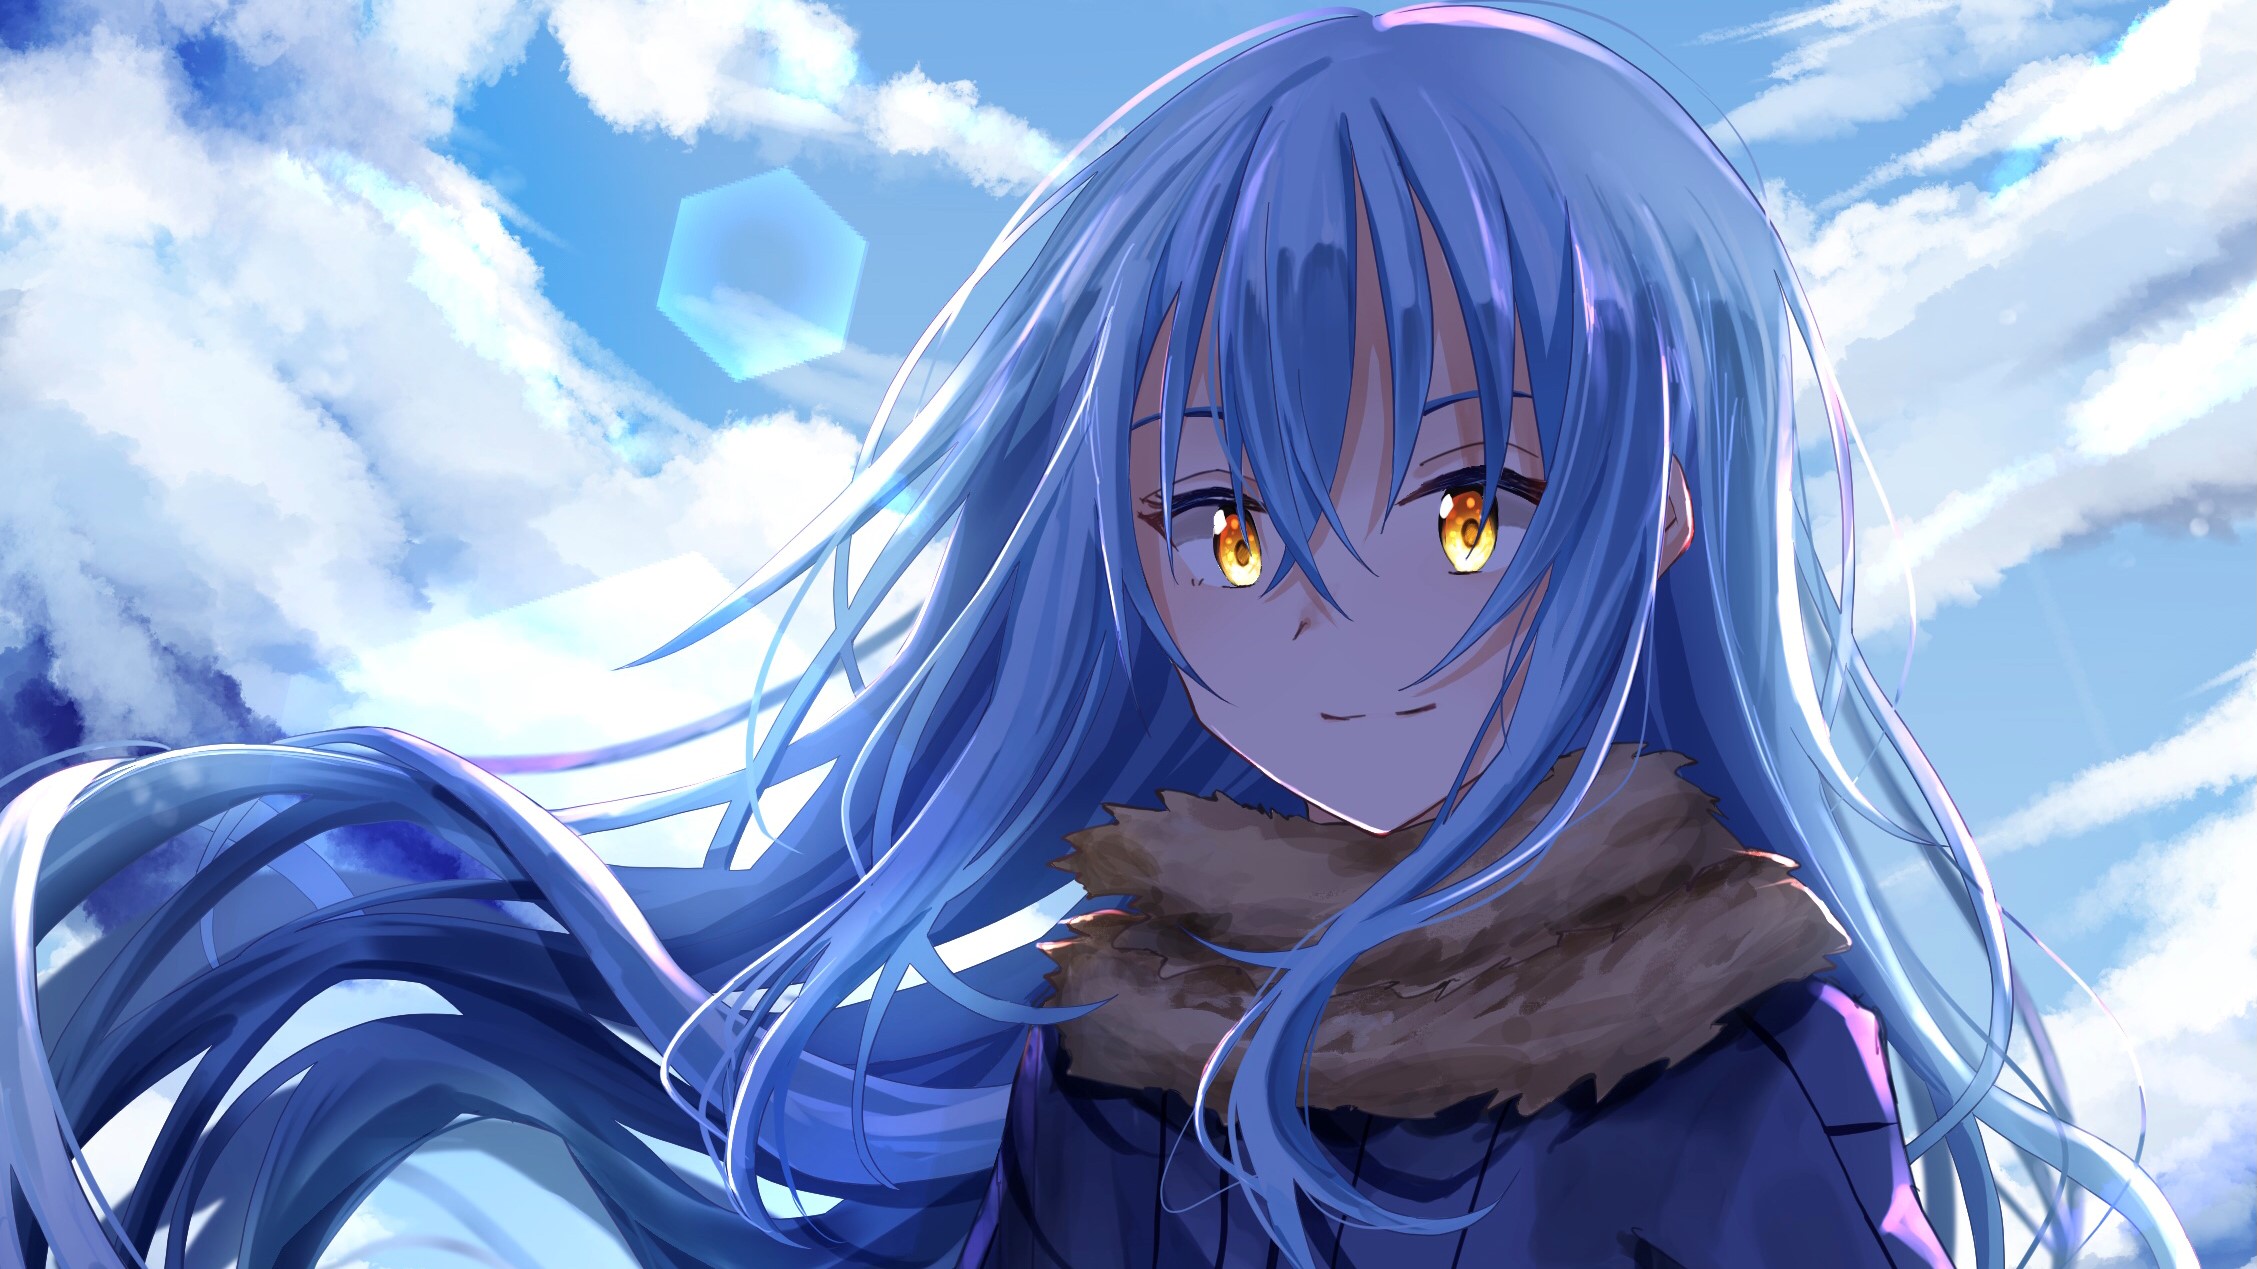 That Time I Got Reincarnated as a Slime HD Wallpaper by しゆ